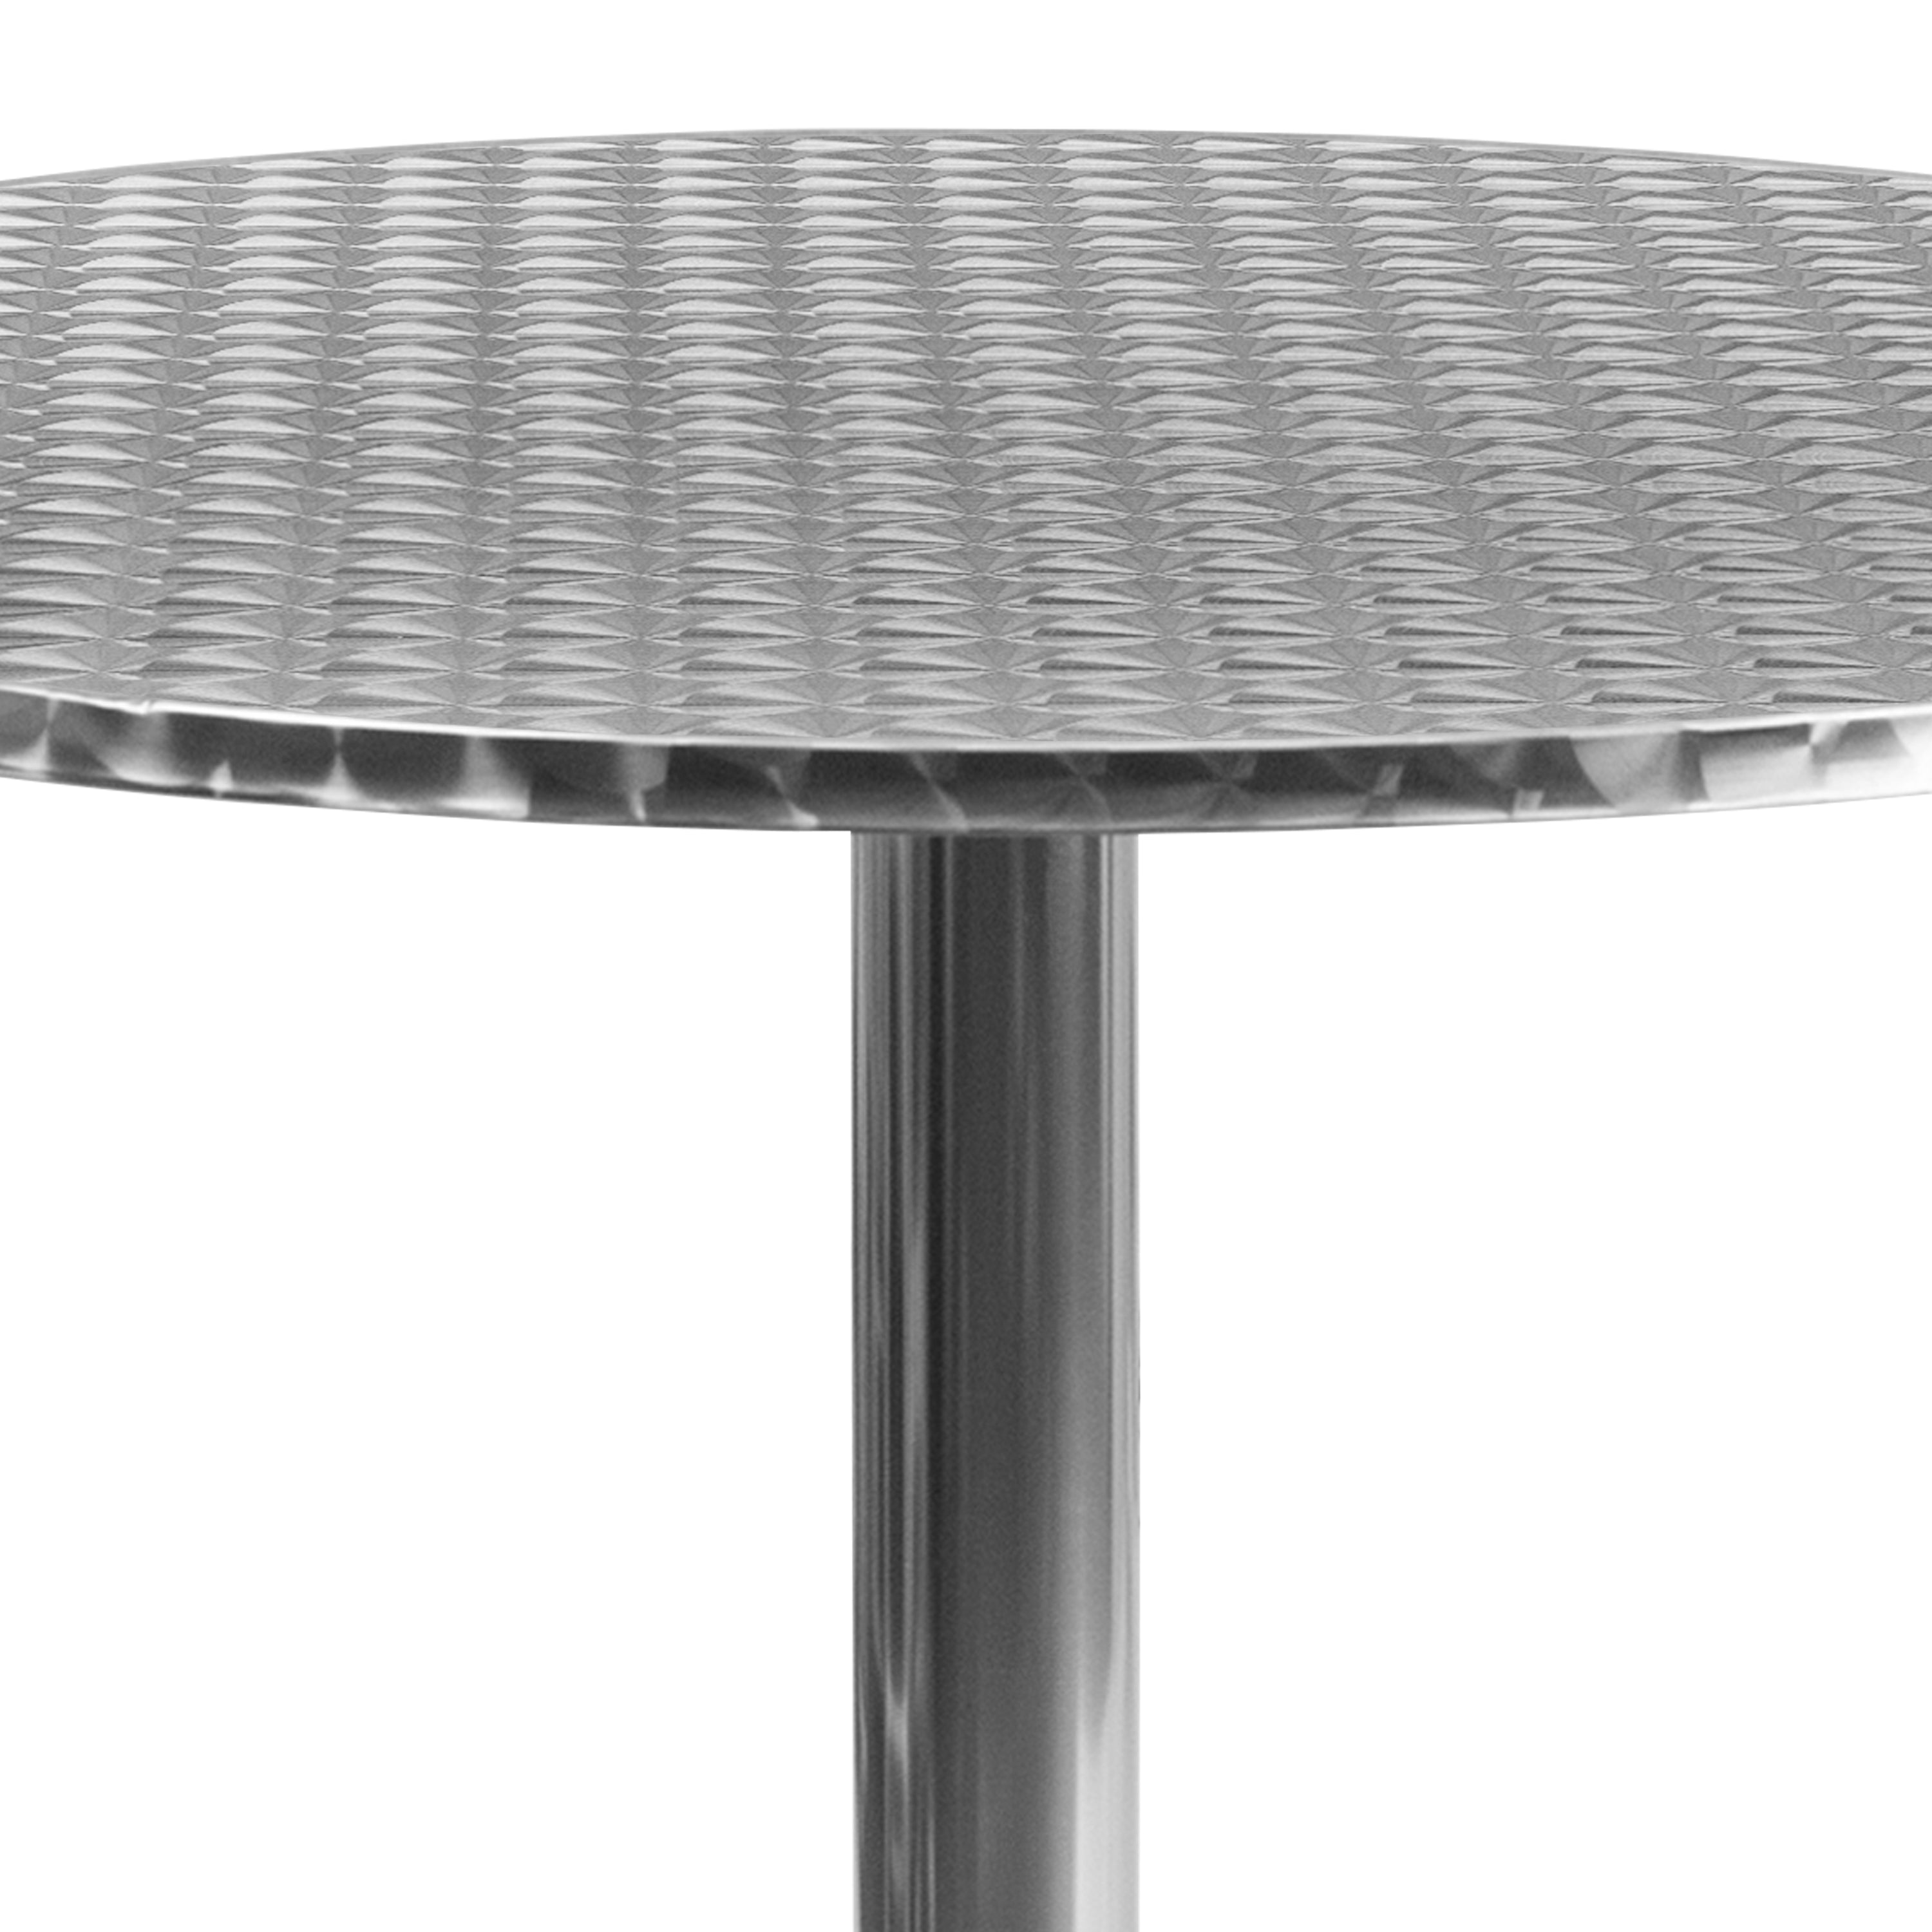 Mellie 31.5'' Round Aluminum Indoor-Outdoor Table with Base-Indoor/Outdoor Tables-Flash Furniture-Wall2Wall Furnishings